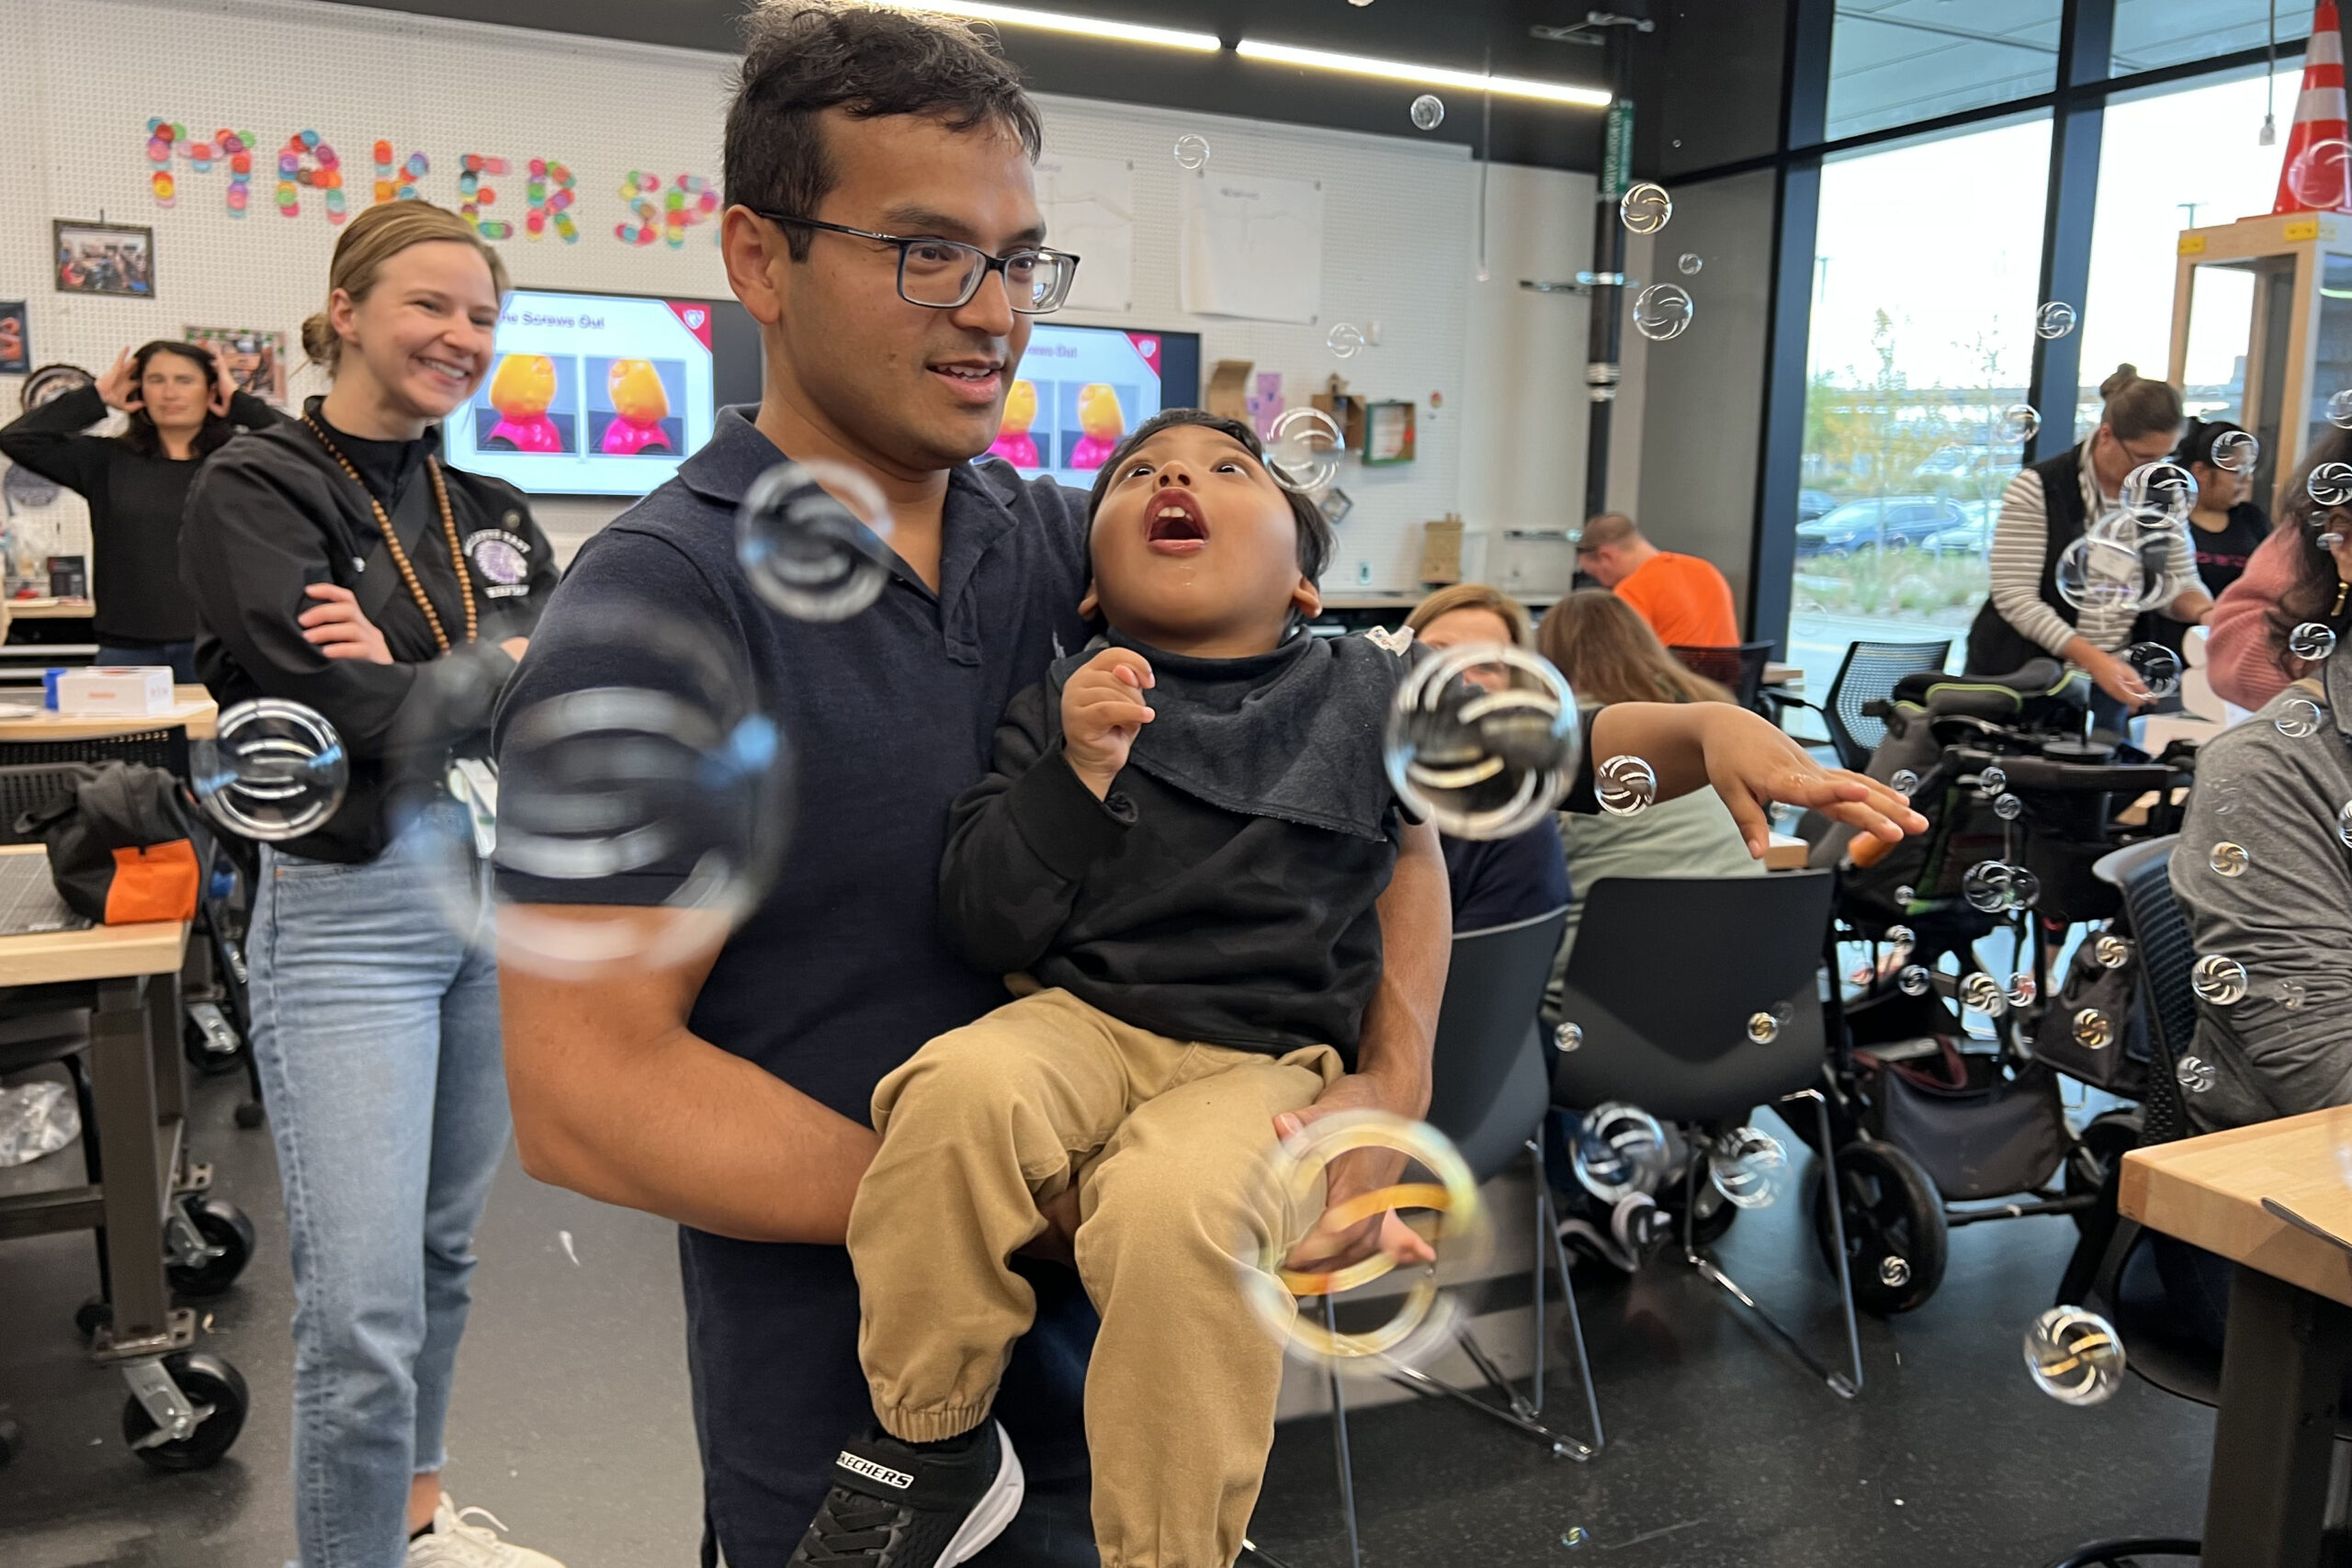 Yuvan Khadgi&comma; held by his father Naresh Khadgi&comma; smiles at bubbles during an adaptive toy workshop&period;